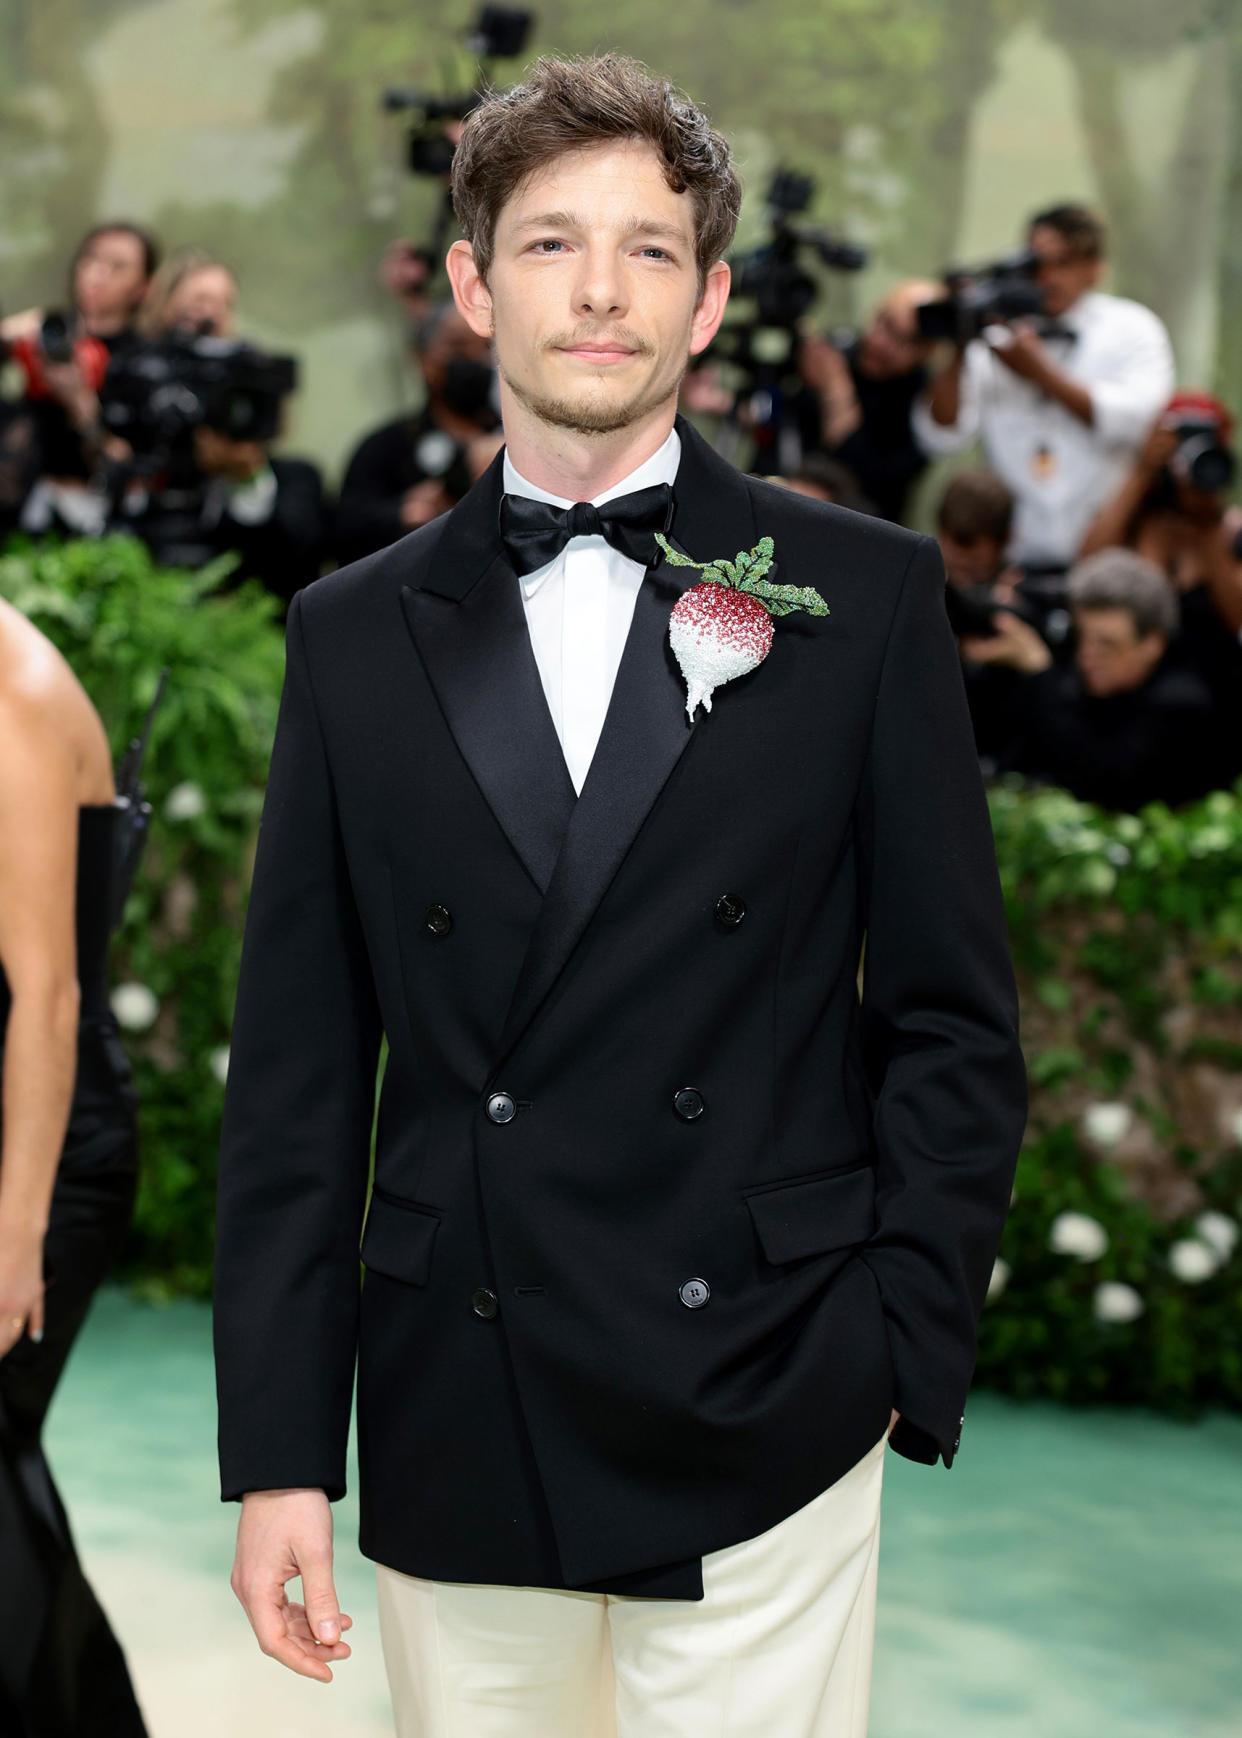 Mike Faist<span class="copyright">Dimitrios Kambouris—Getty Images for The Met Museum/Vogue</span>